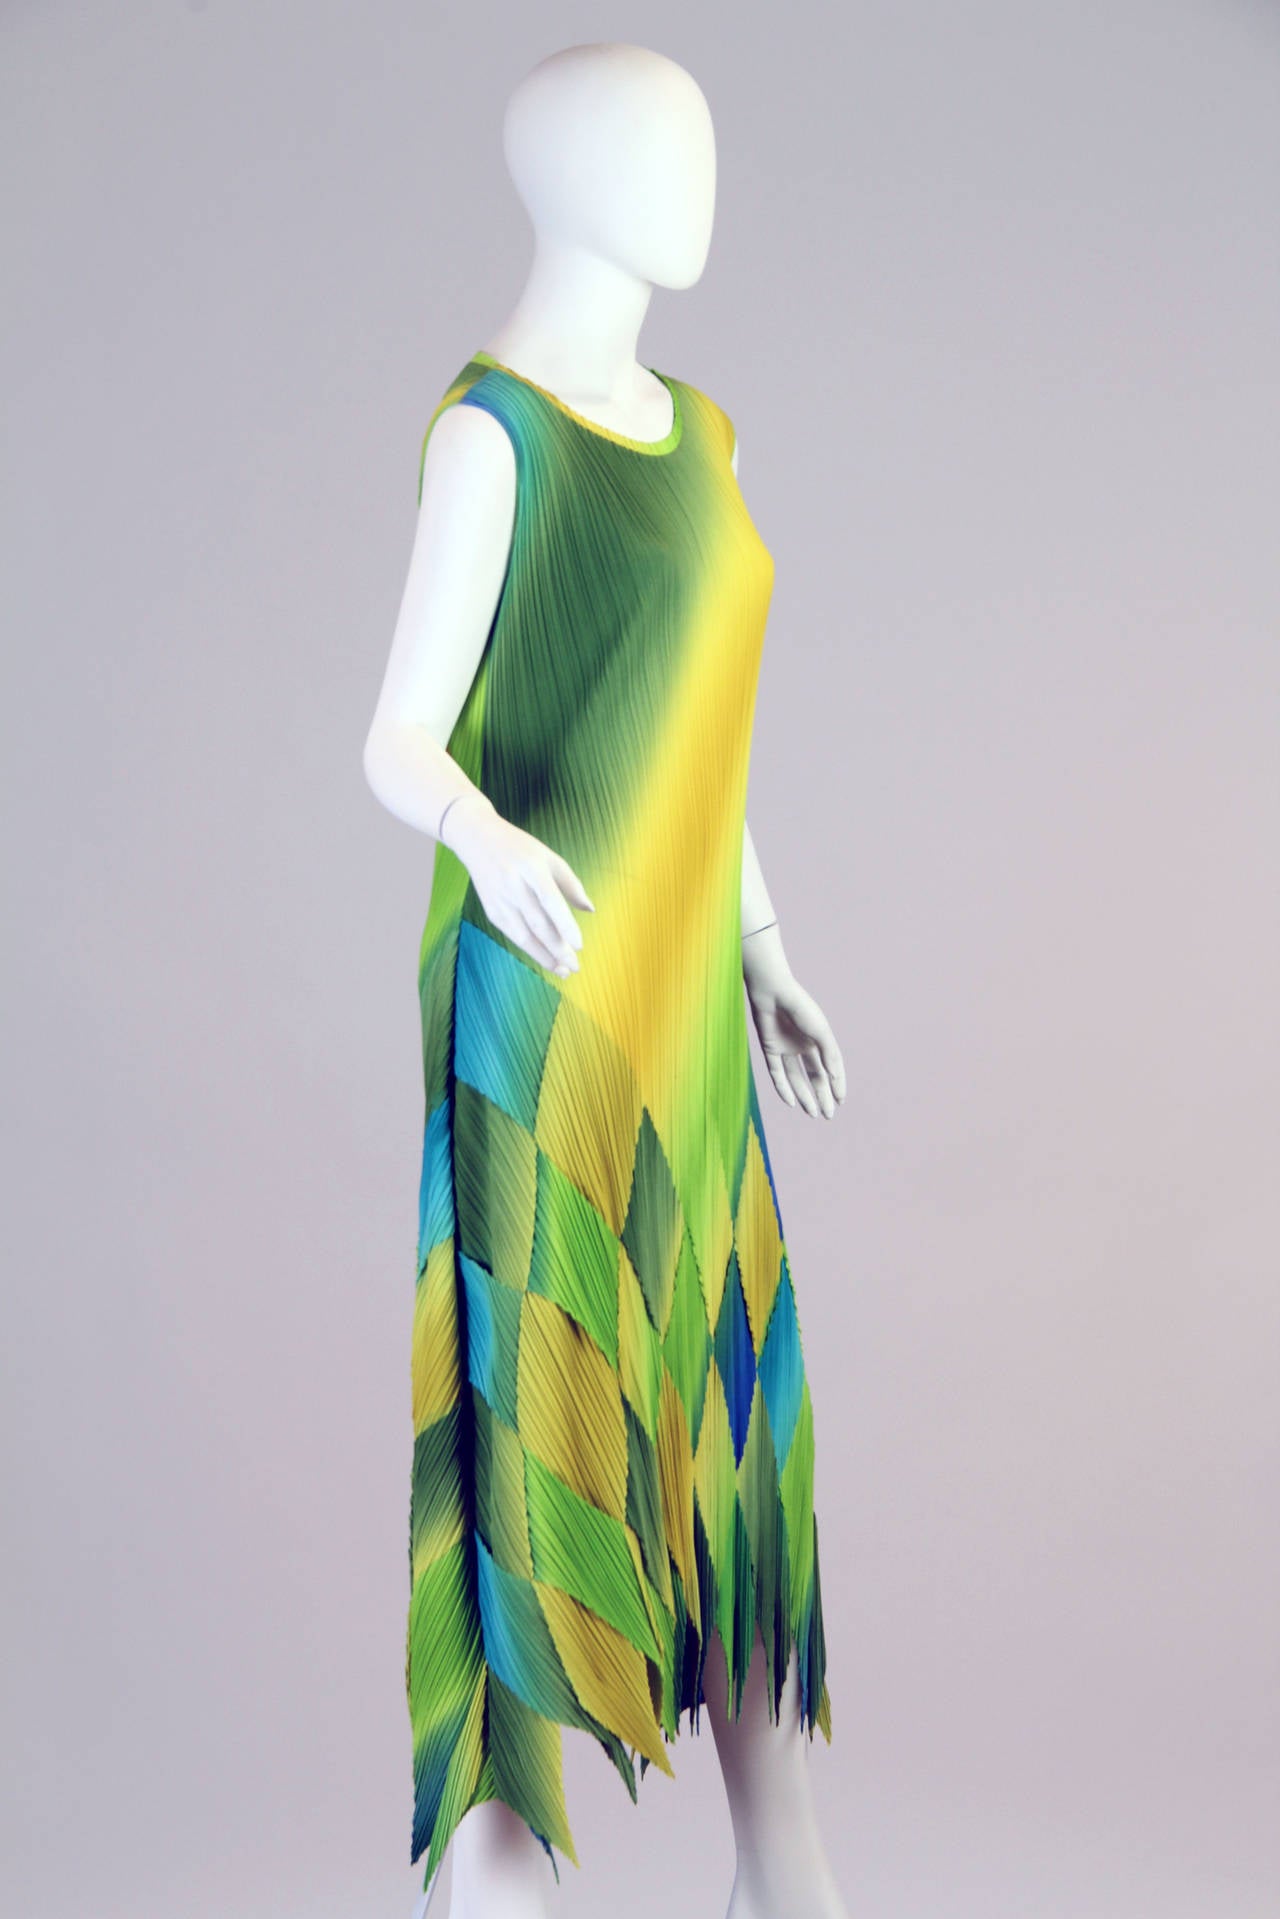 This 1990s Issey Miyake sleeveless dress is constructed of a vibrant a blue, green, and yellow pleated polyester fabric. The bright hues are enveloped together in a diamond pattern at the bottom of the dress, while a jagged hemline adds a chic flair